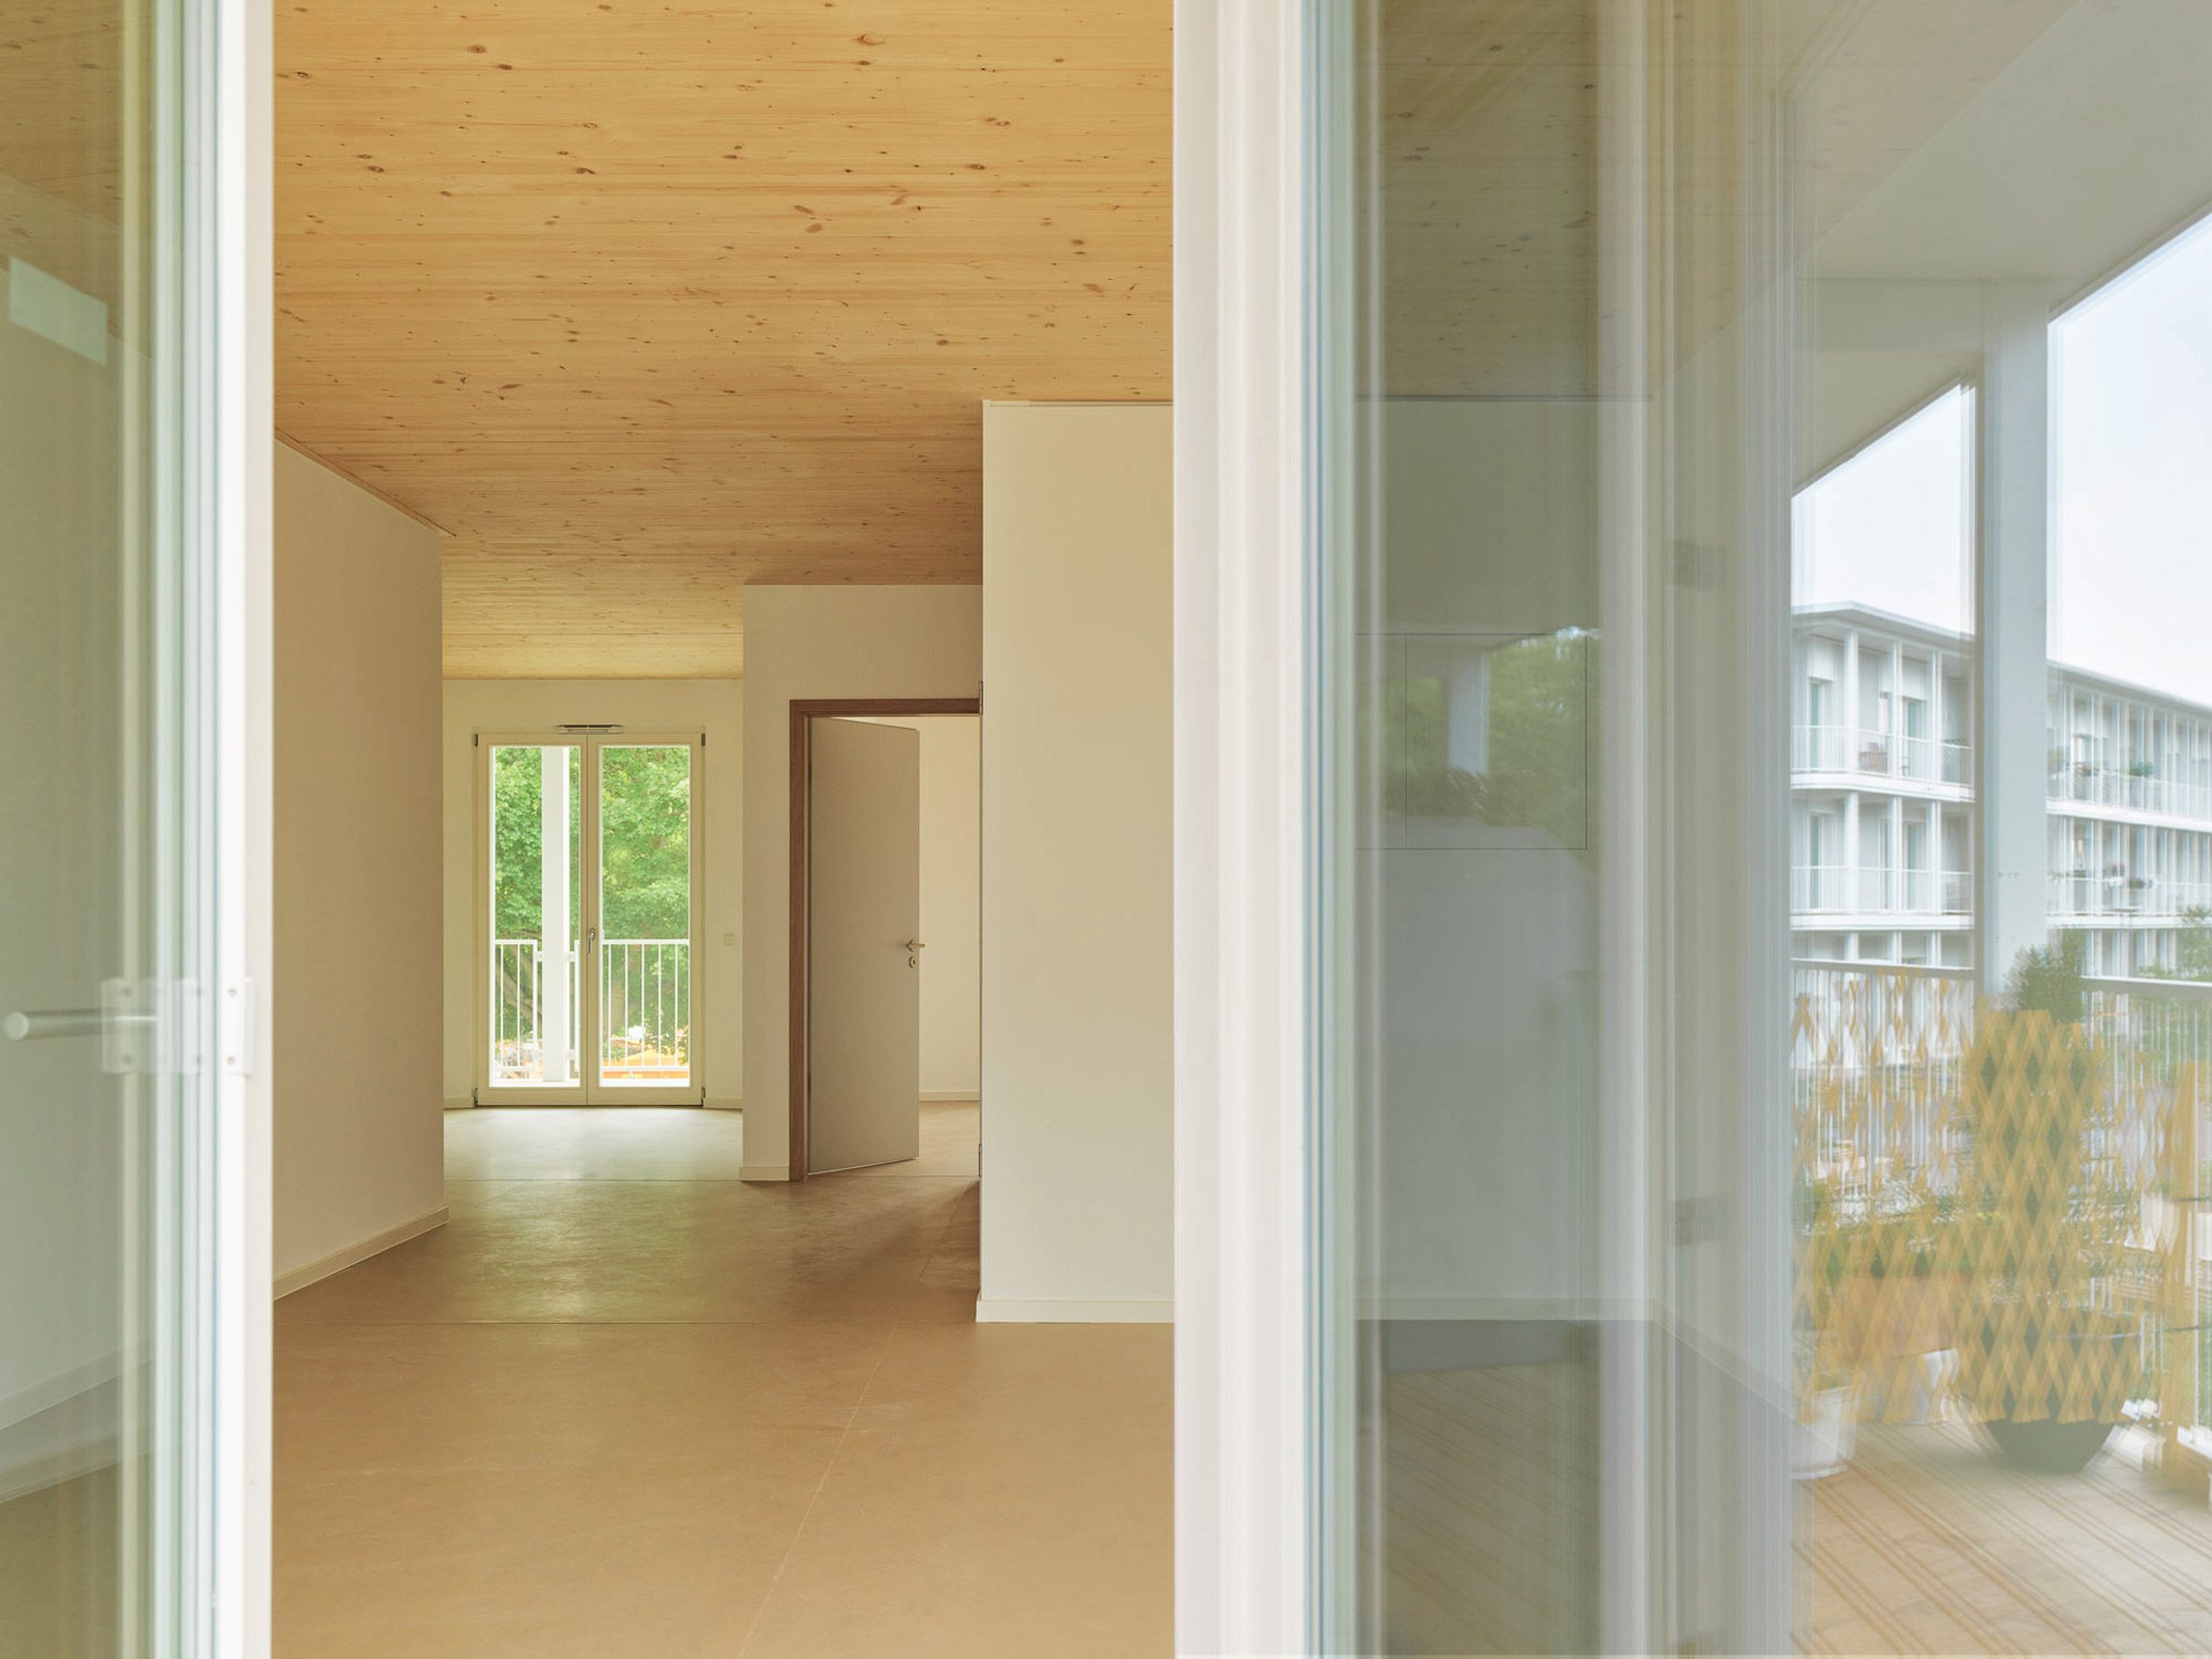 Room with cross-laminated floor and ceilings in a multi-generational housing project